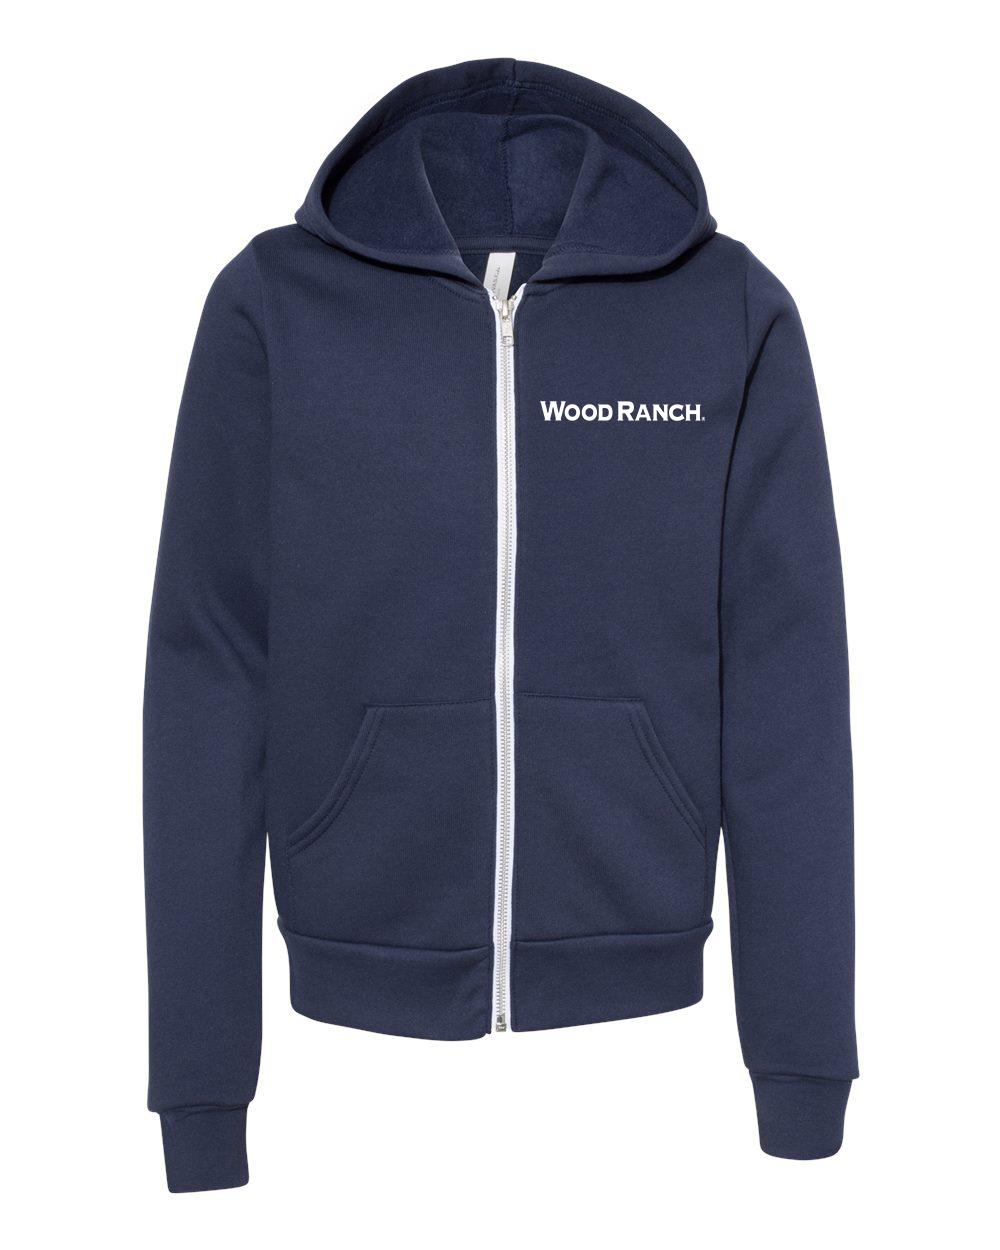 About the product. Frontside of navy blue zipper hoodie style garment. White Wood Ranch logo on the pocket side. This is a youth size.